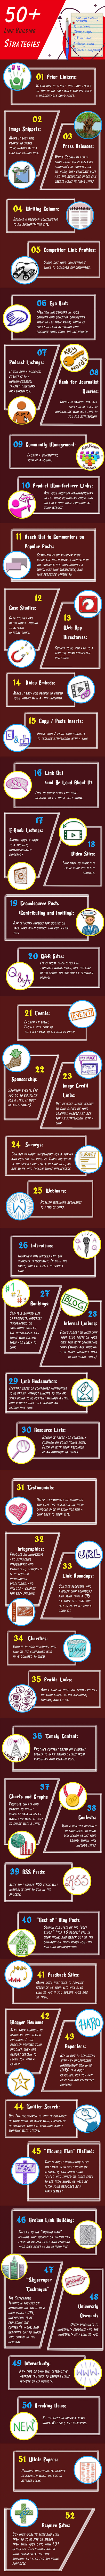 Link Building SEO Infographic